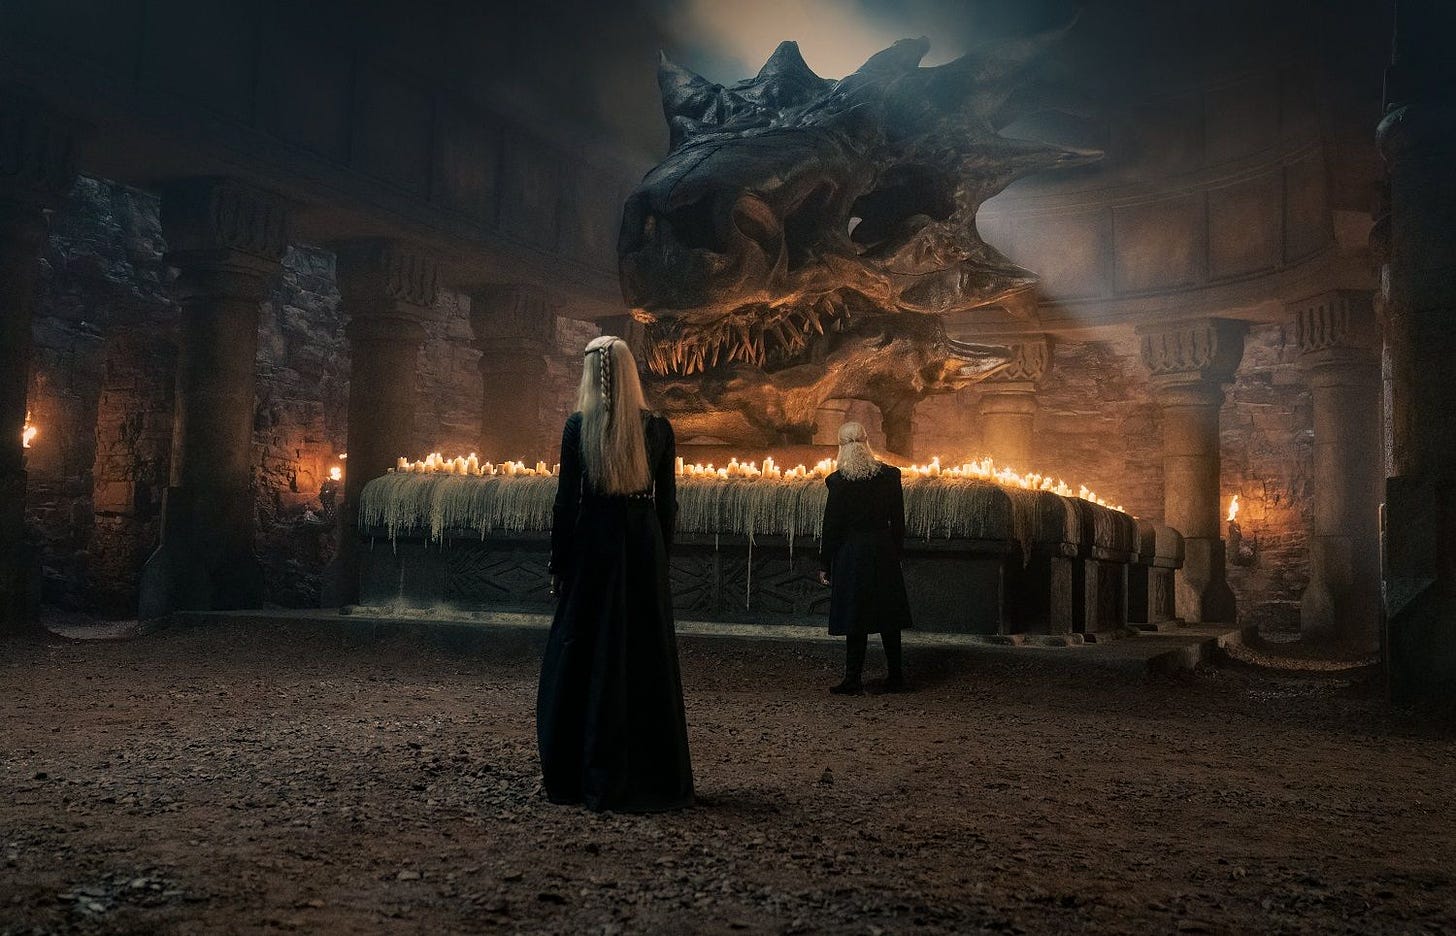 House of Dragon' trailer: Everything we know about the GoT prequel